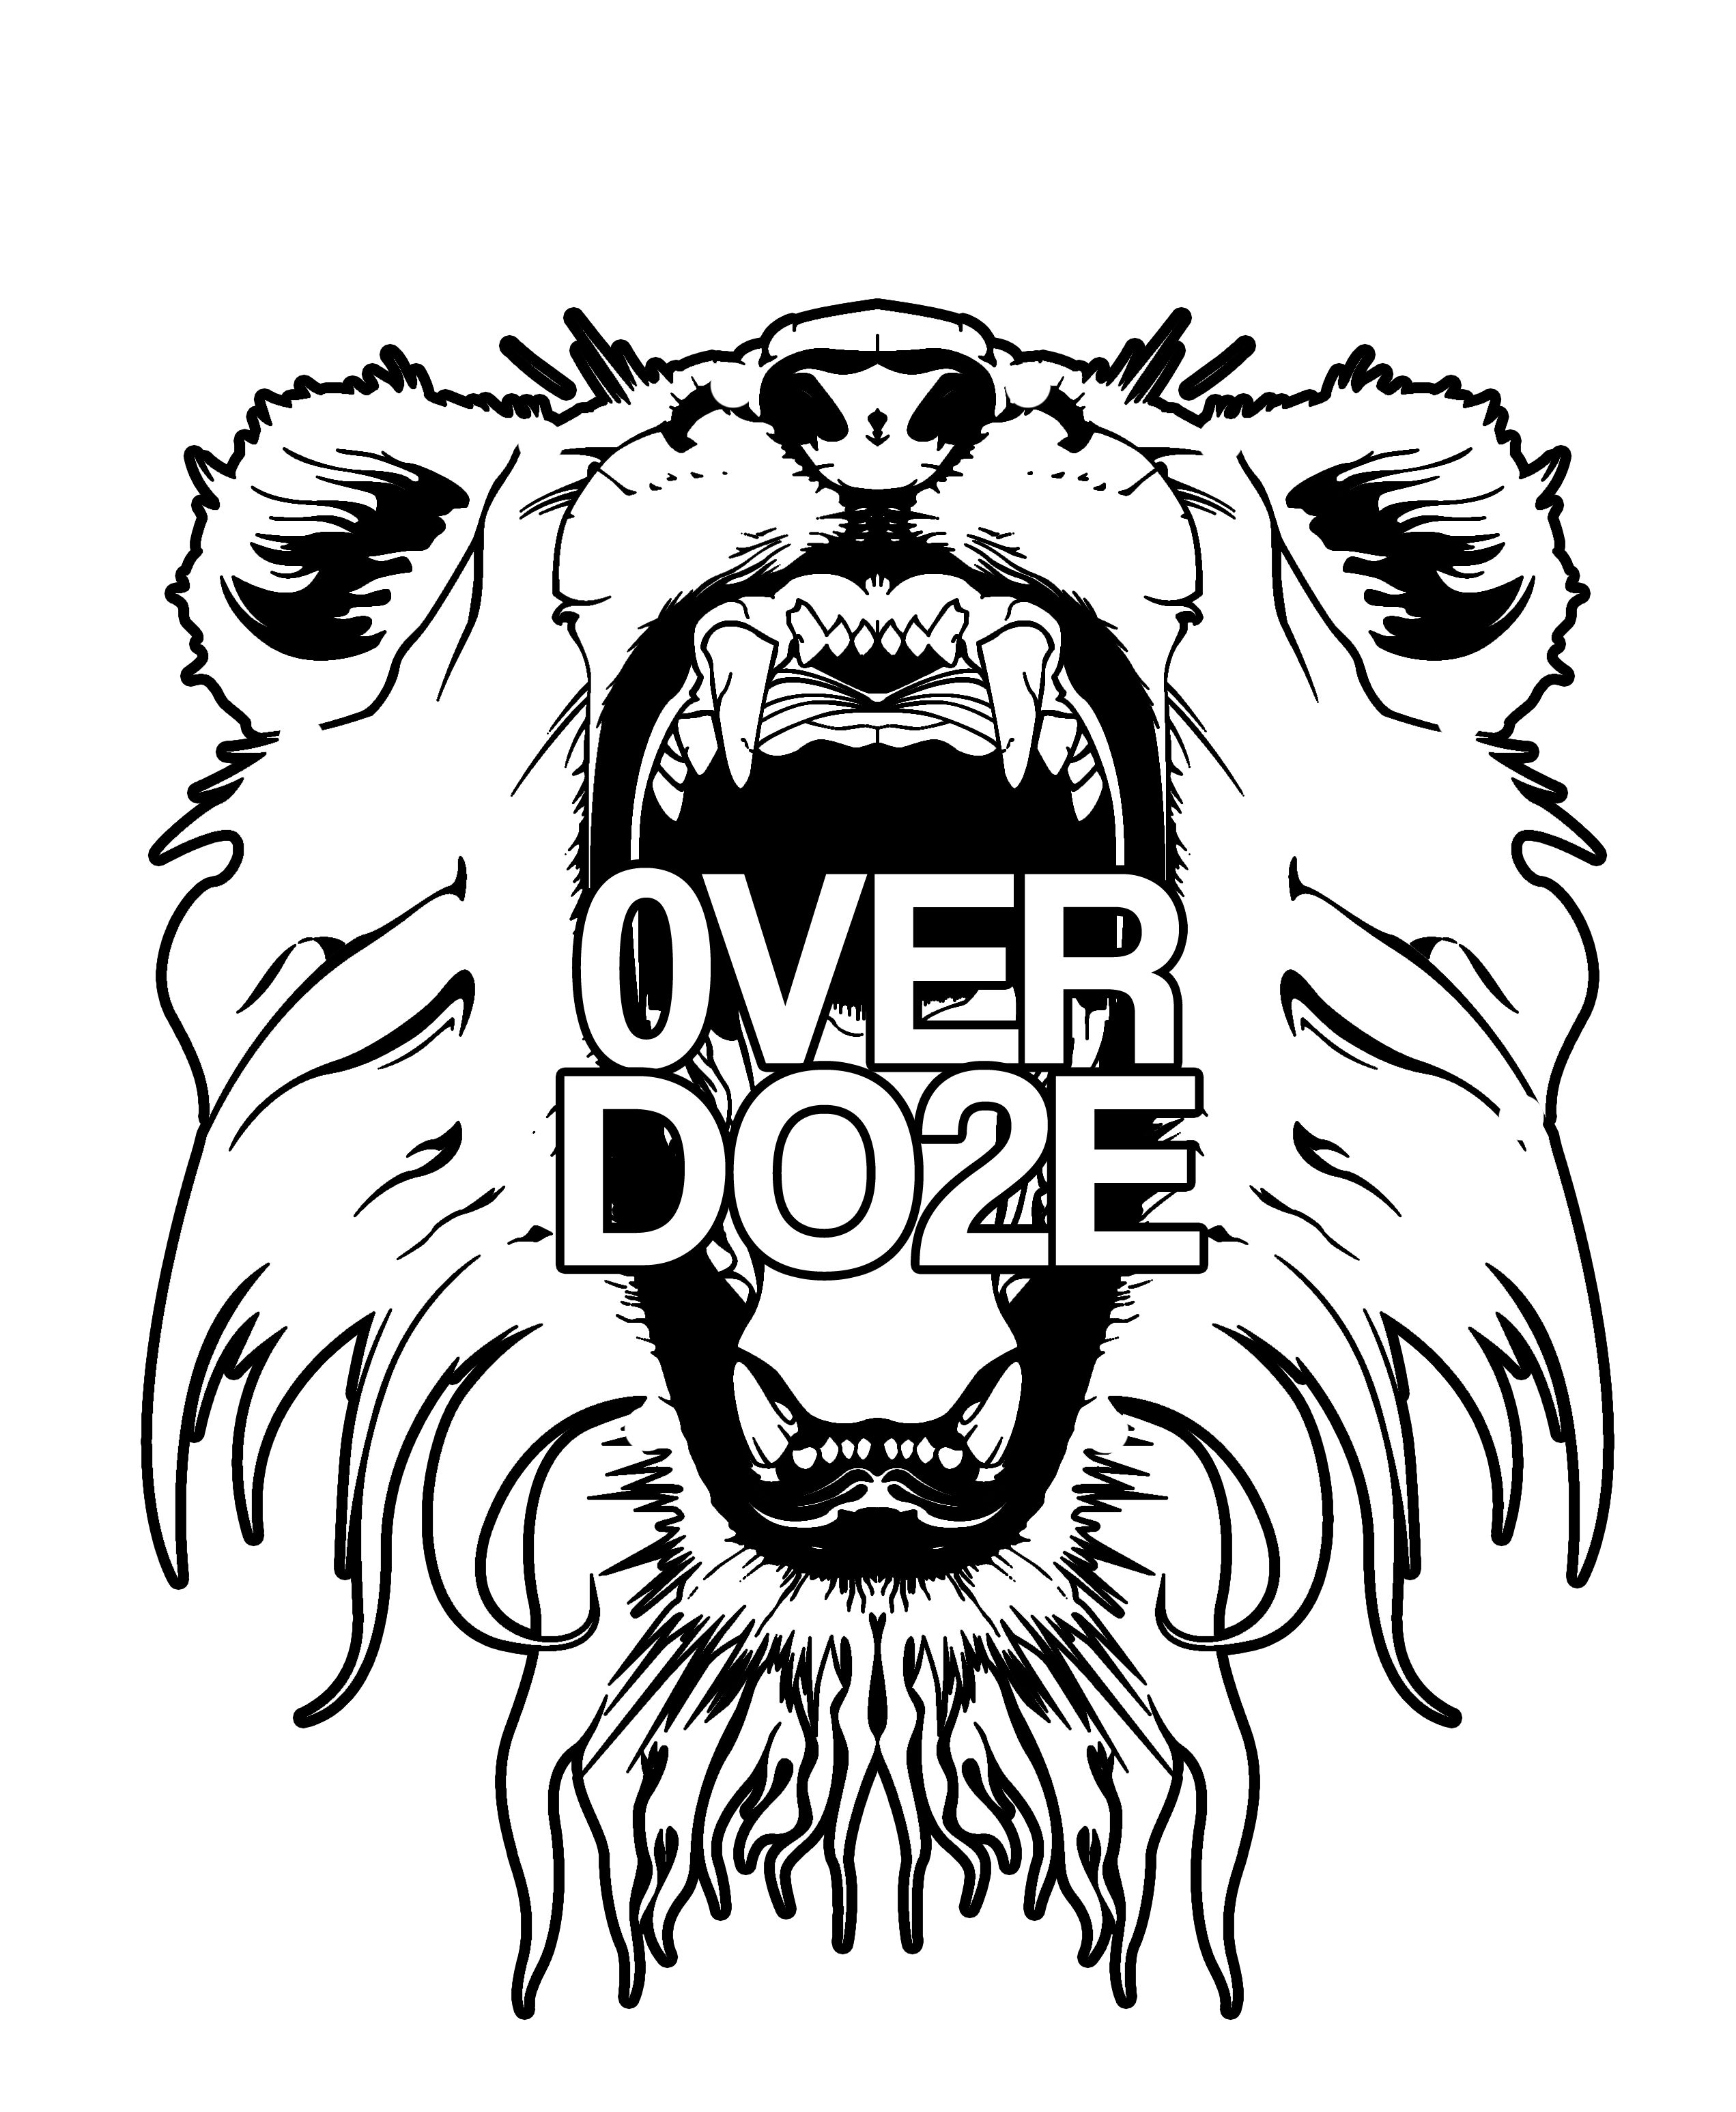 Lion Roar Tee from Over Dose [Submitted – These guys may hate me after